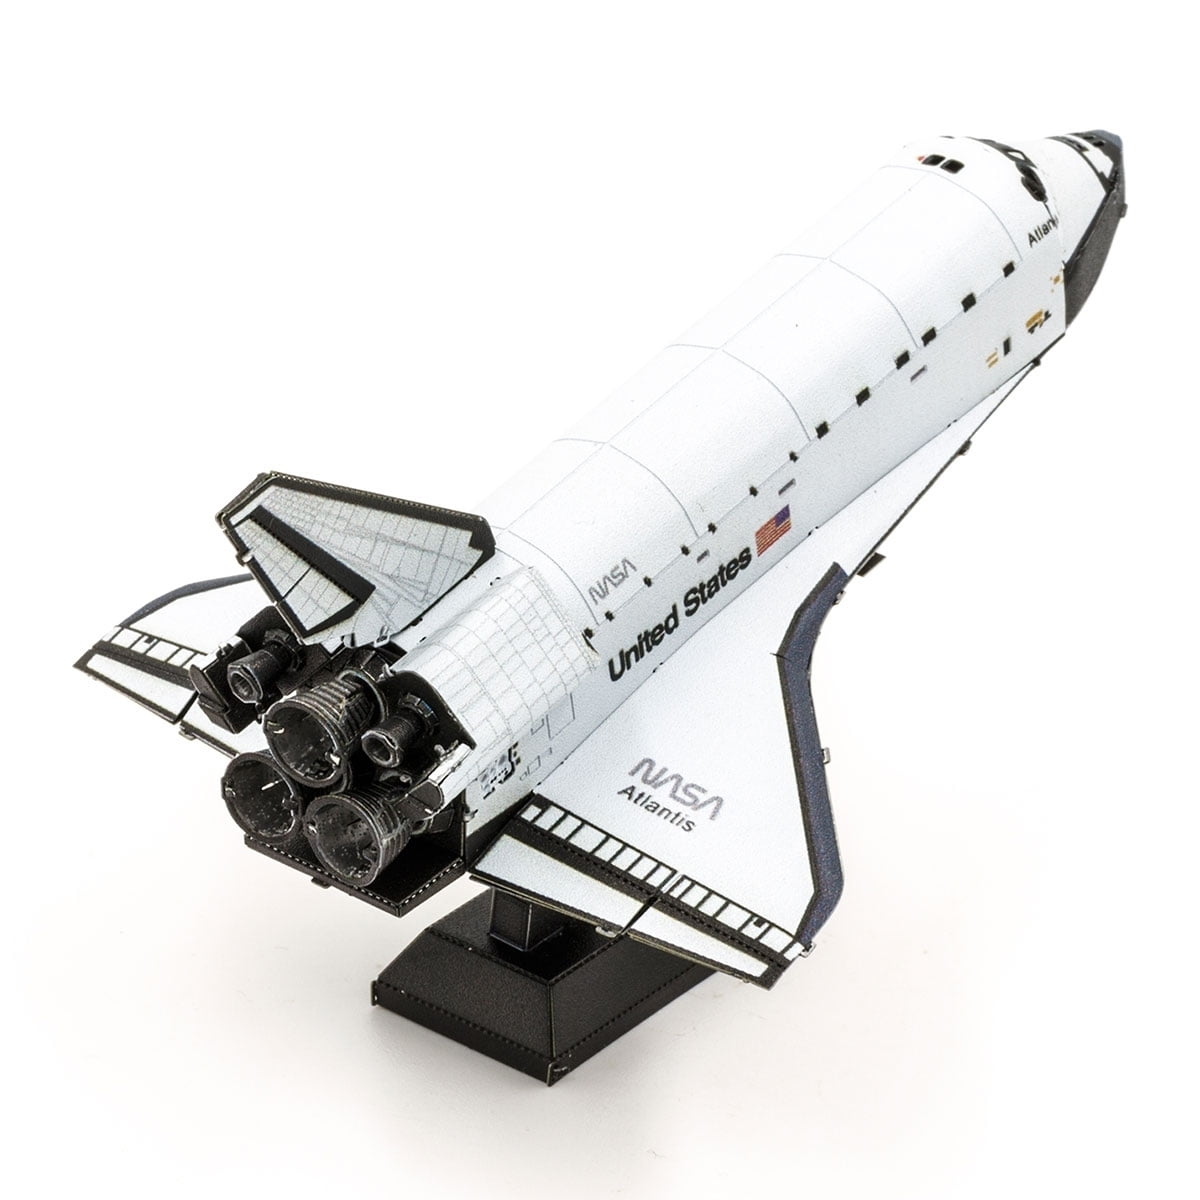 Fascinations Metal Earth Space Shuttle Discovery Color Version 3D Metal Model Kit 